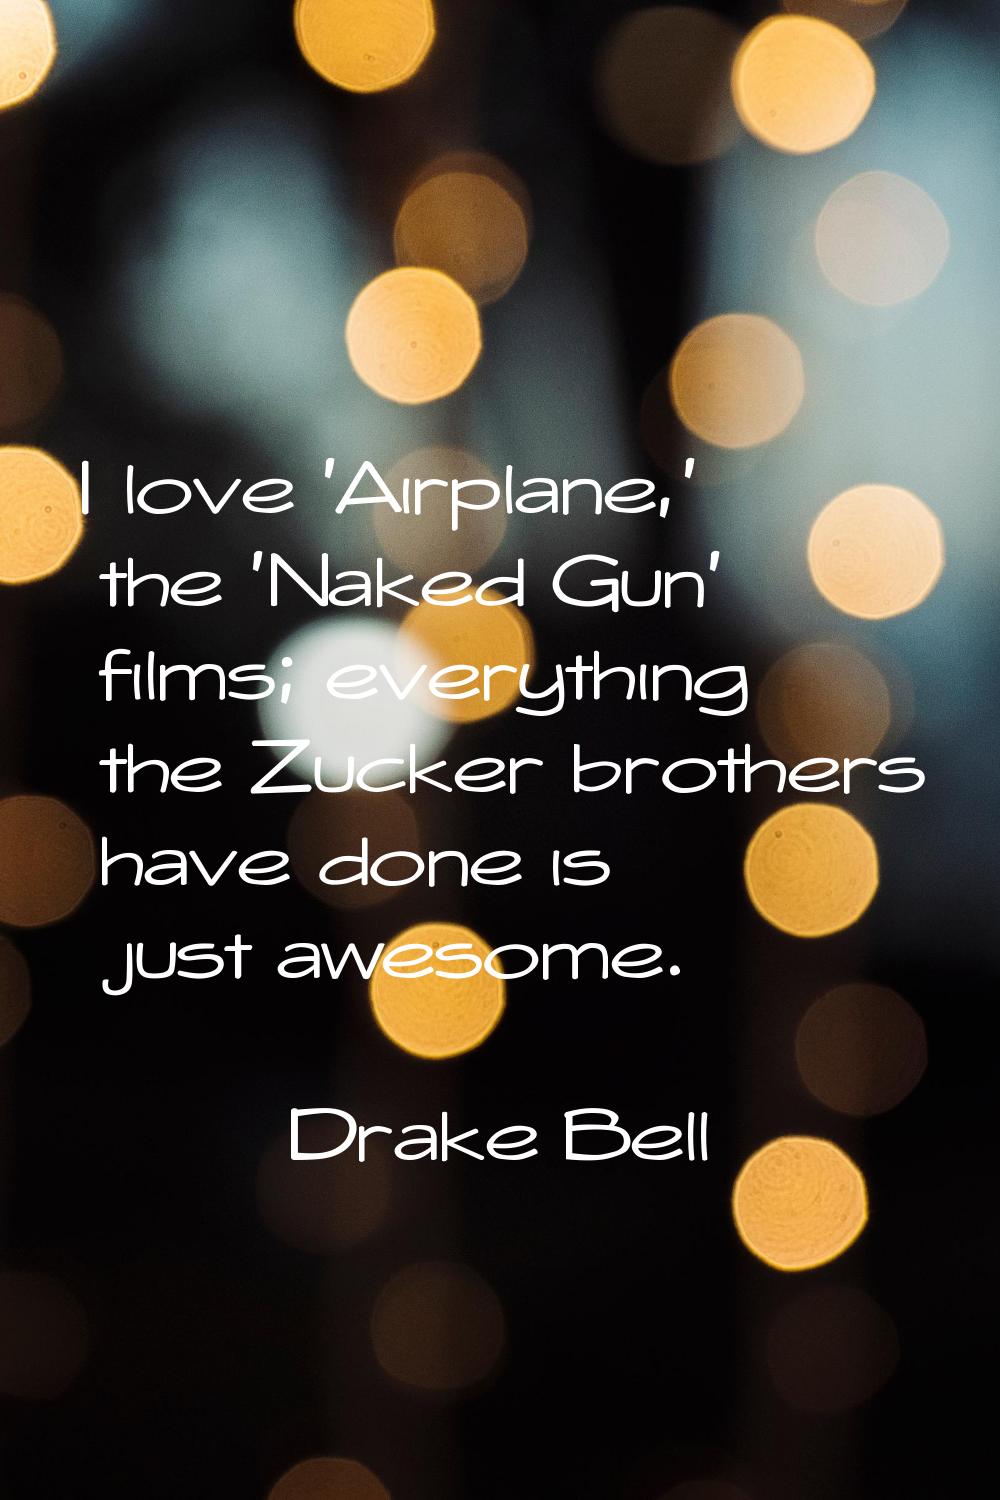 I love 'Airplane,' the 'Naked Gun' films; everything the Zucker brothers have done is just awesome.